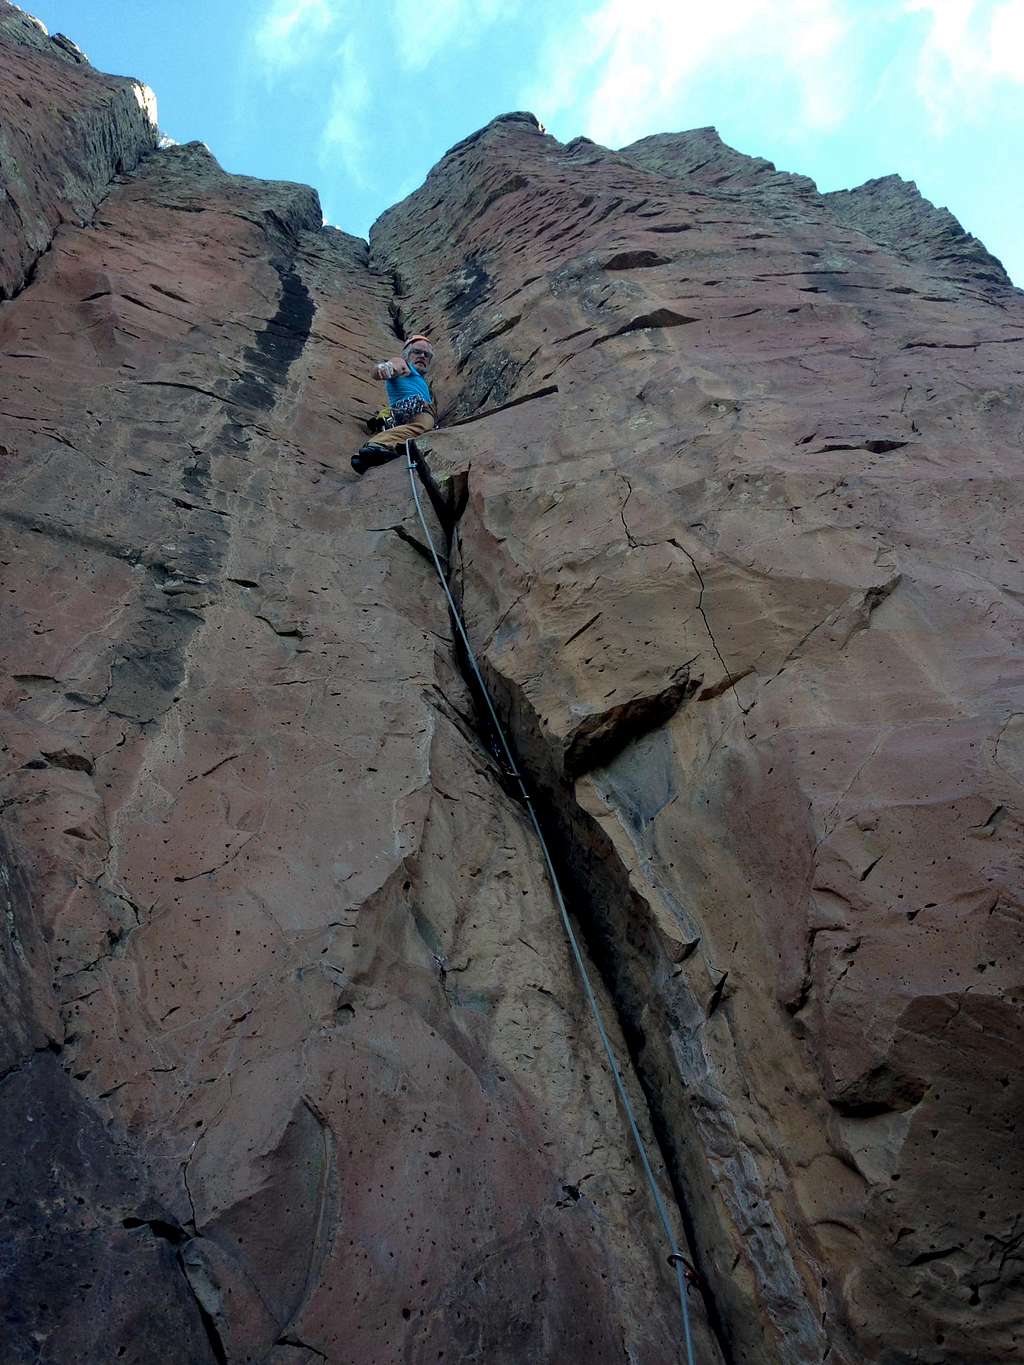 Dow leading Crack from Hell, 5.10b